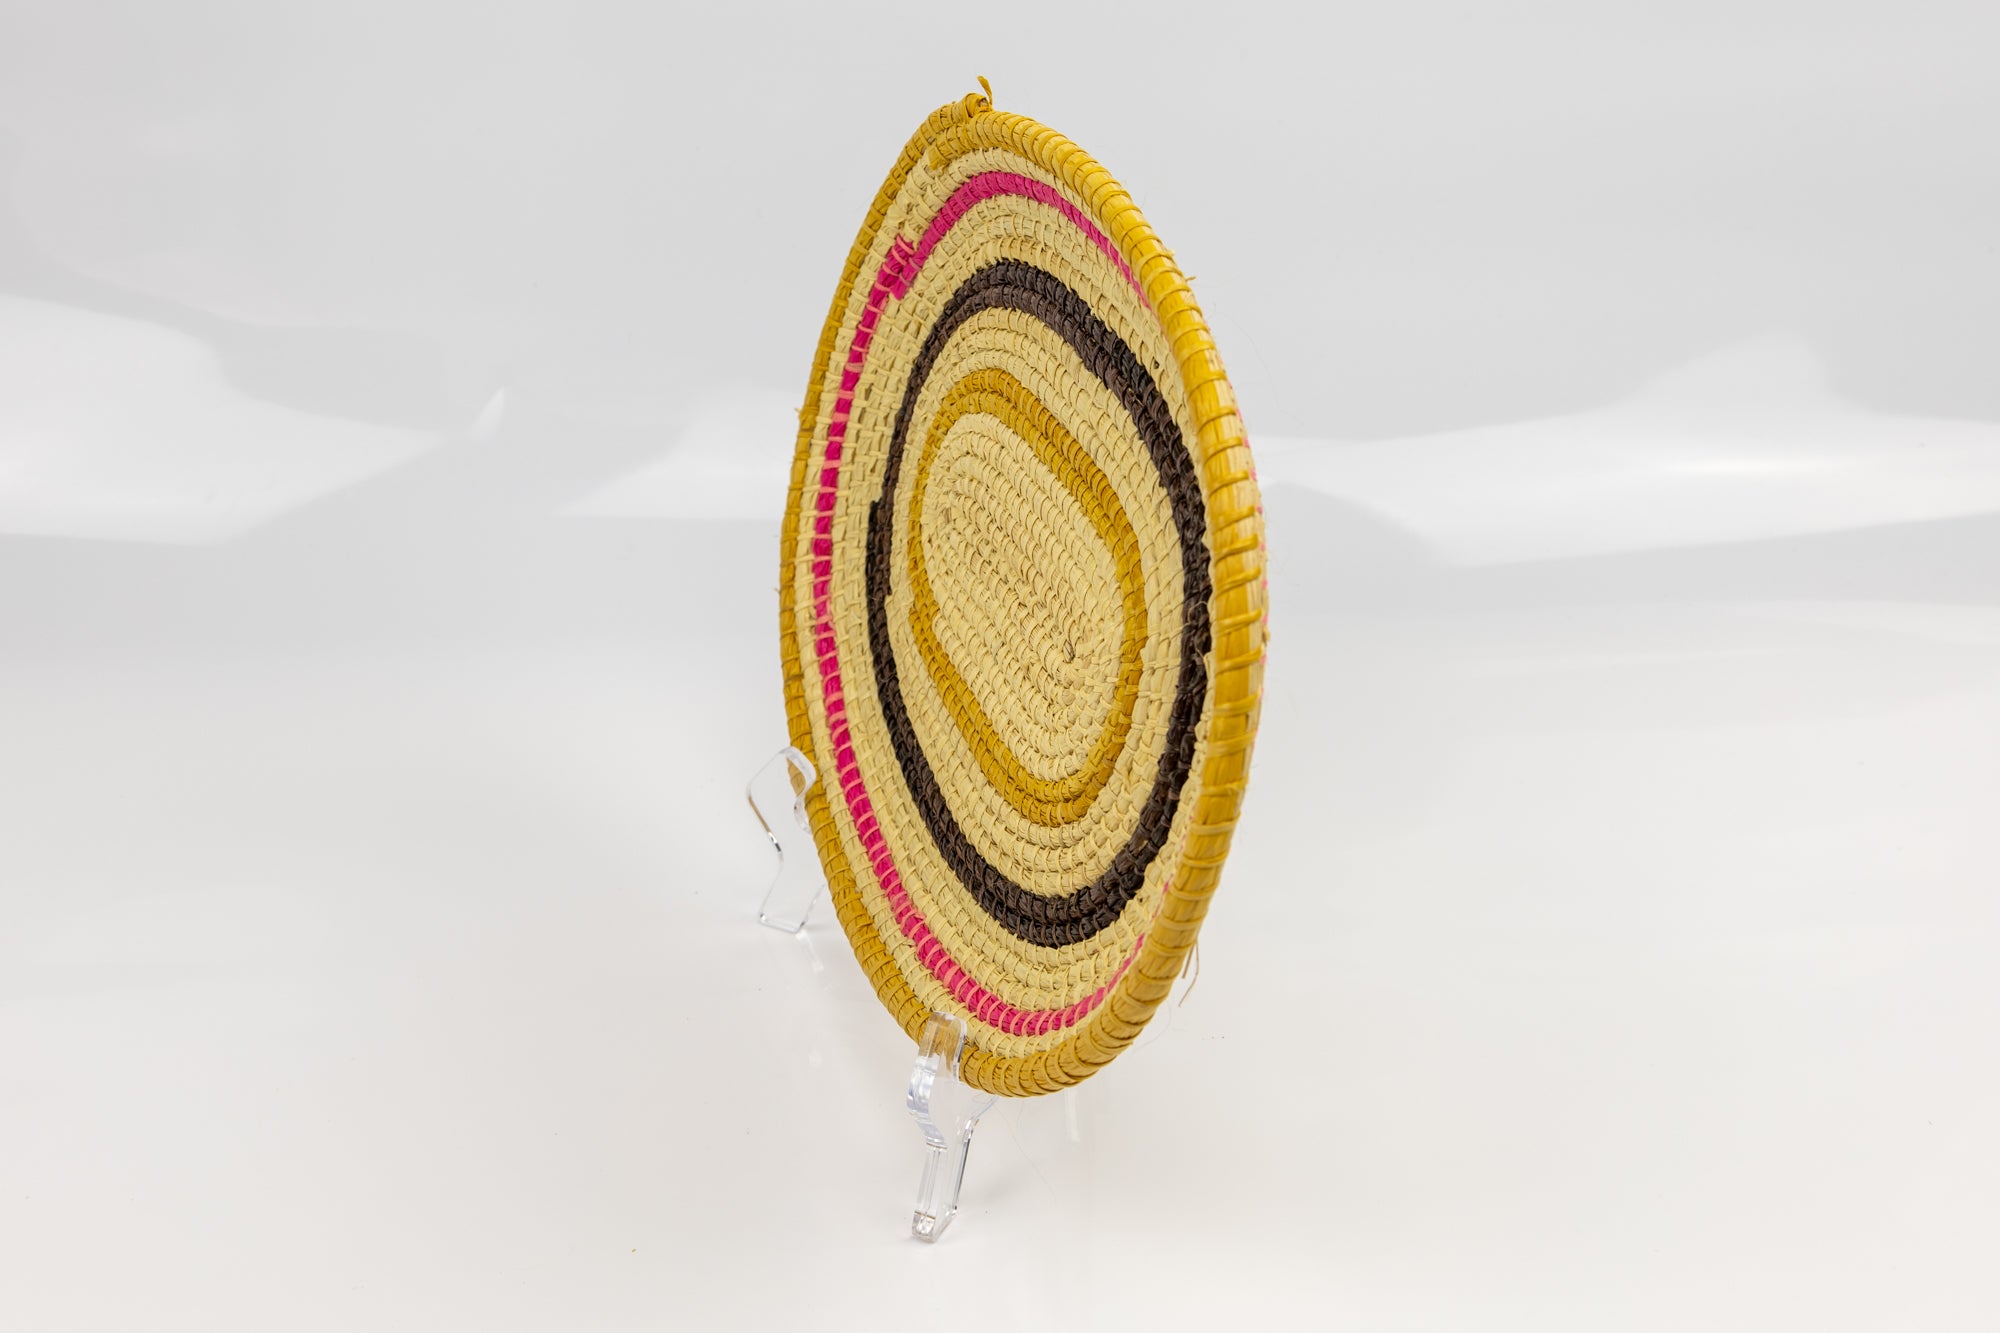 Pink, gold, brown and white. Oval design. Hand woven plate basket. Made in Panama.